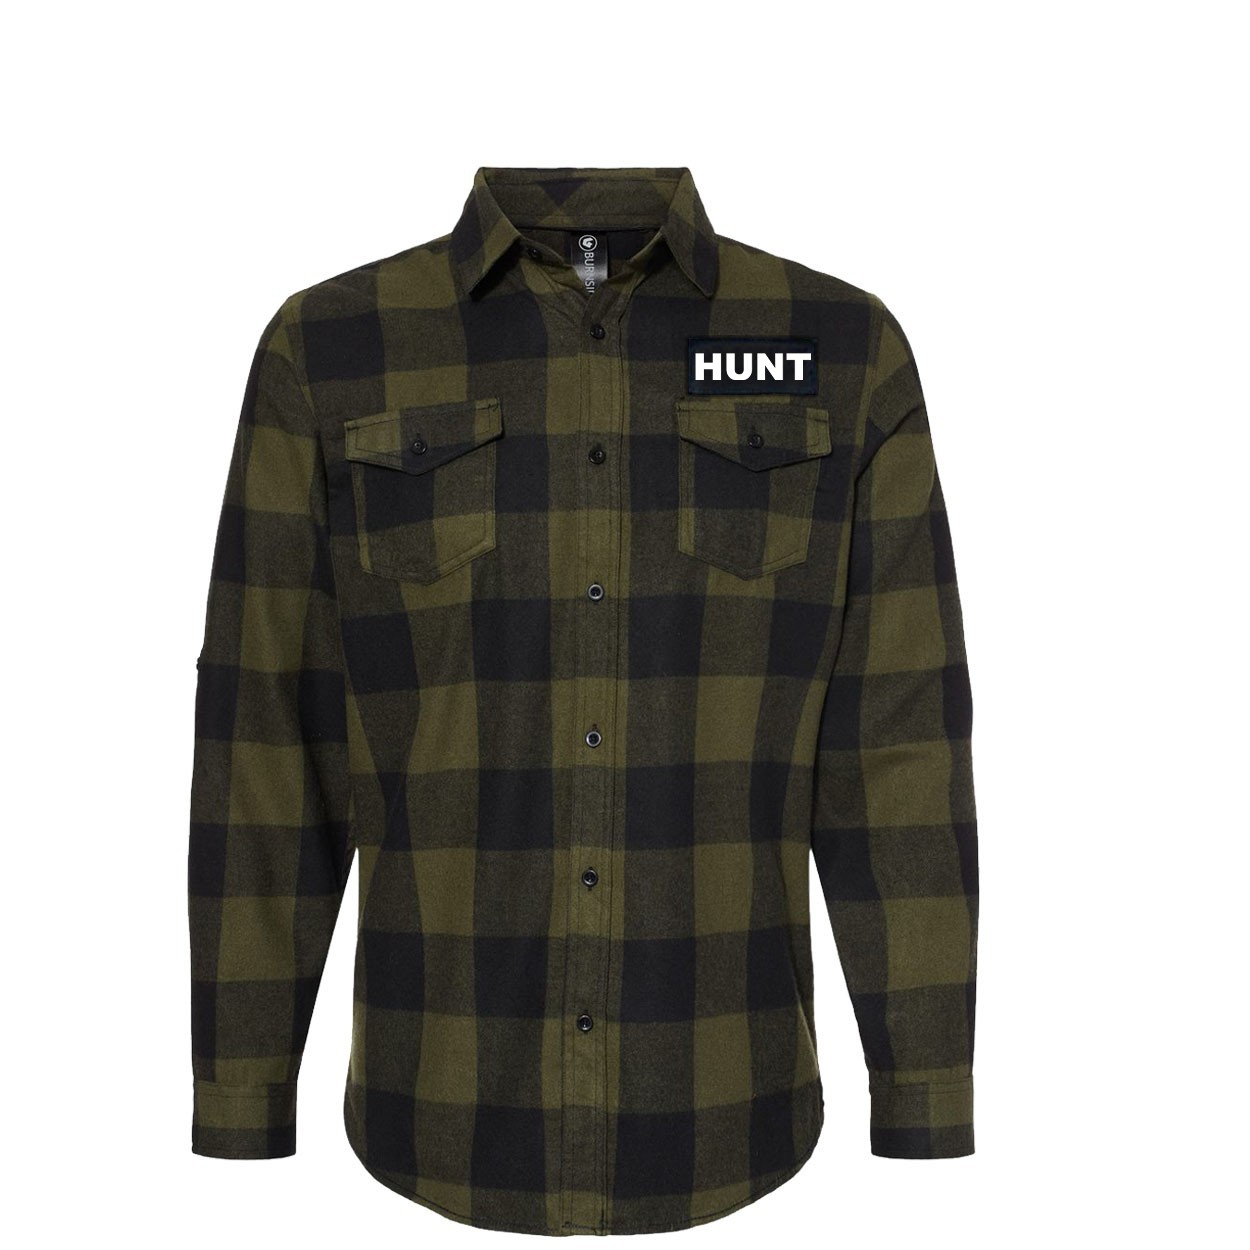 Hunt Brand Logo Classic Unisex Long Sleeve Woven Patch Flannel Shirt Army/Black (White Logo)